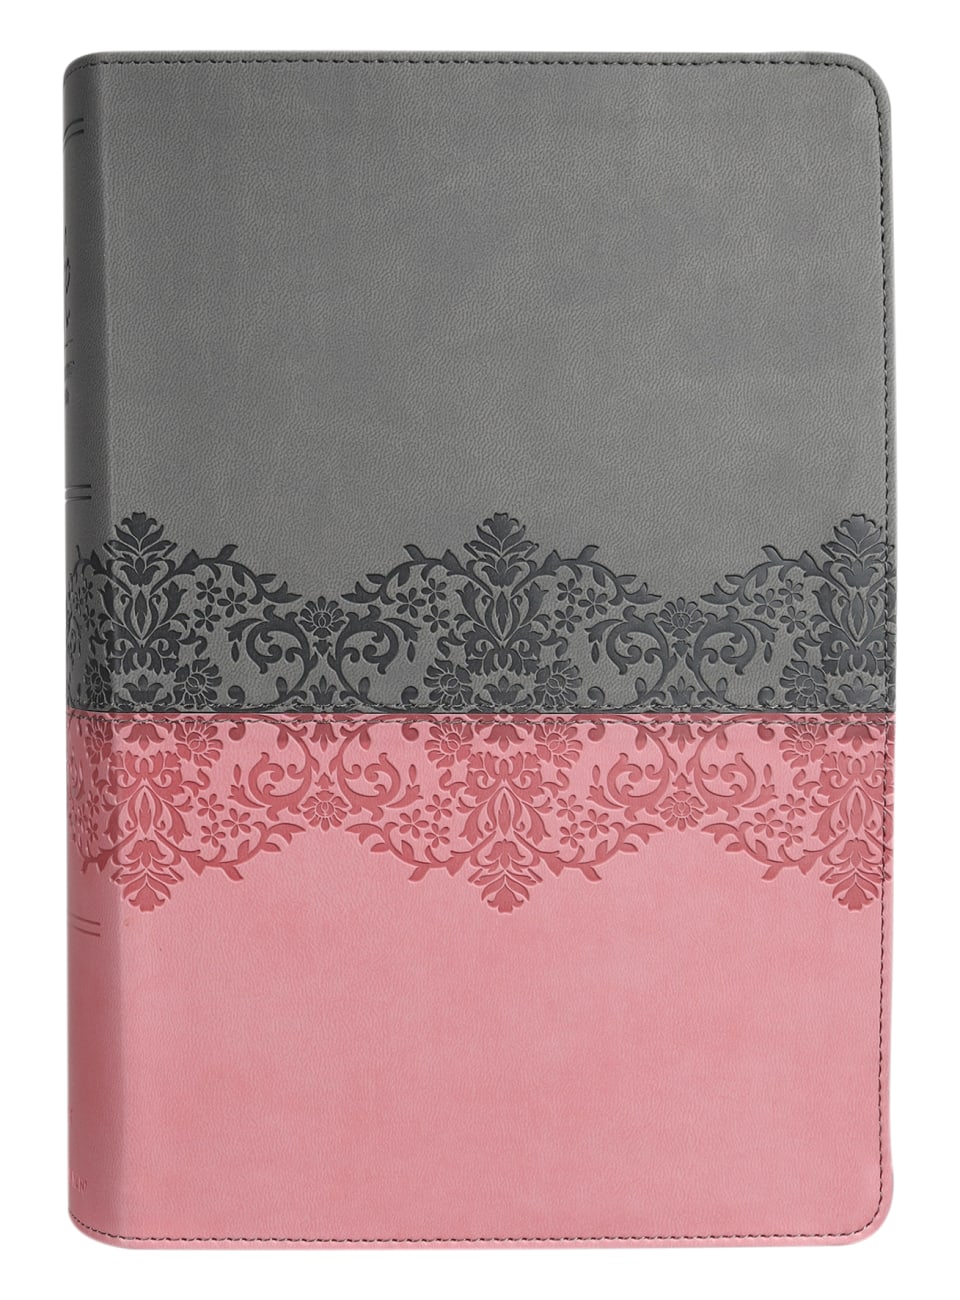 NIV Life Application Study Bible 3rd Edition Gray/Pink (Red Letter Edition) Premium Imitation Leather